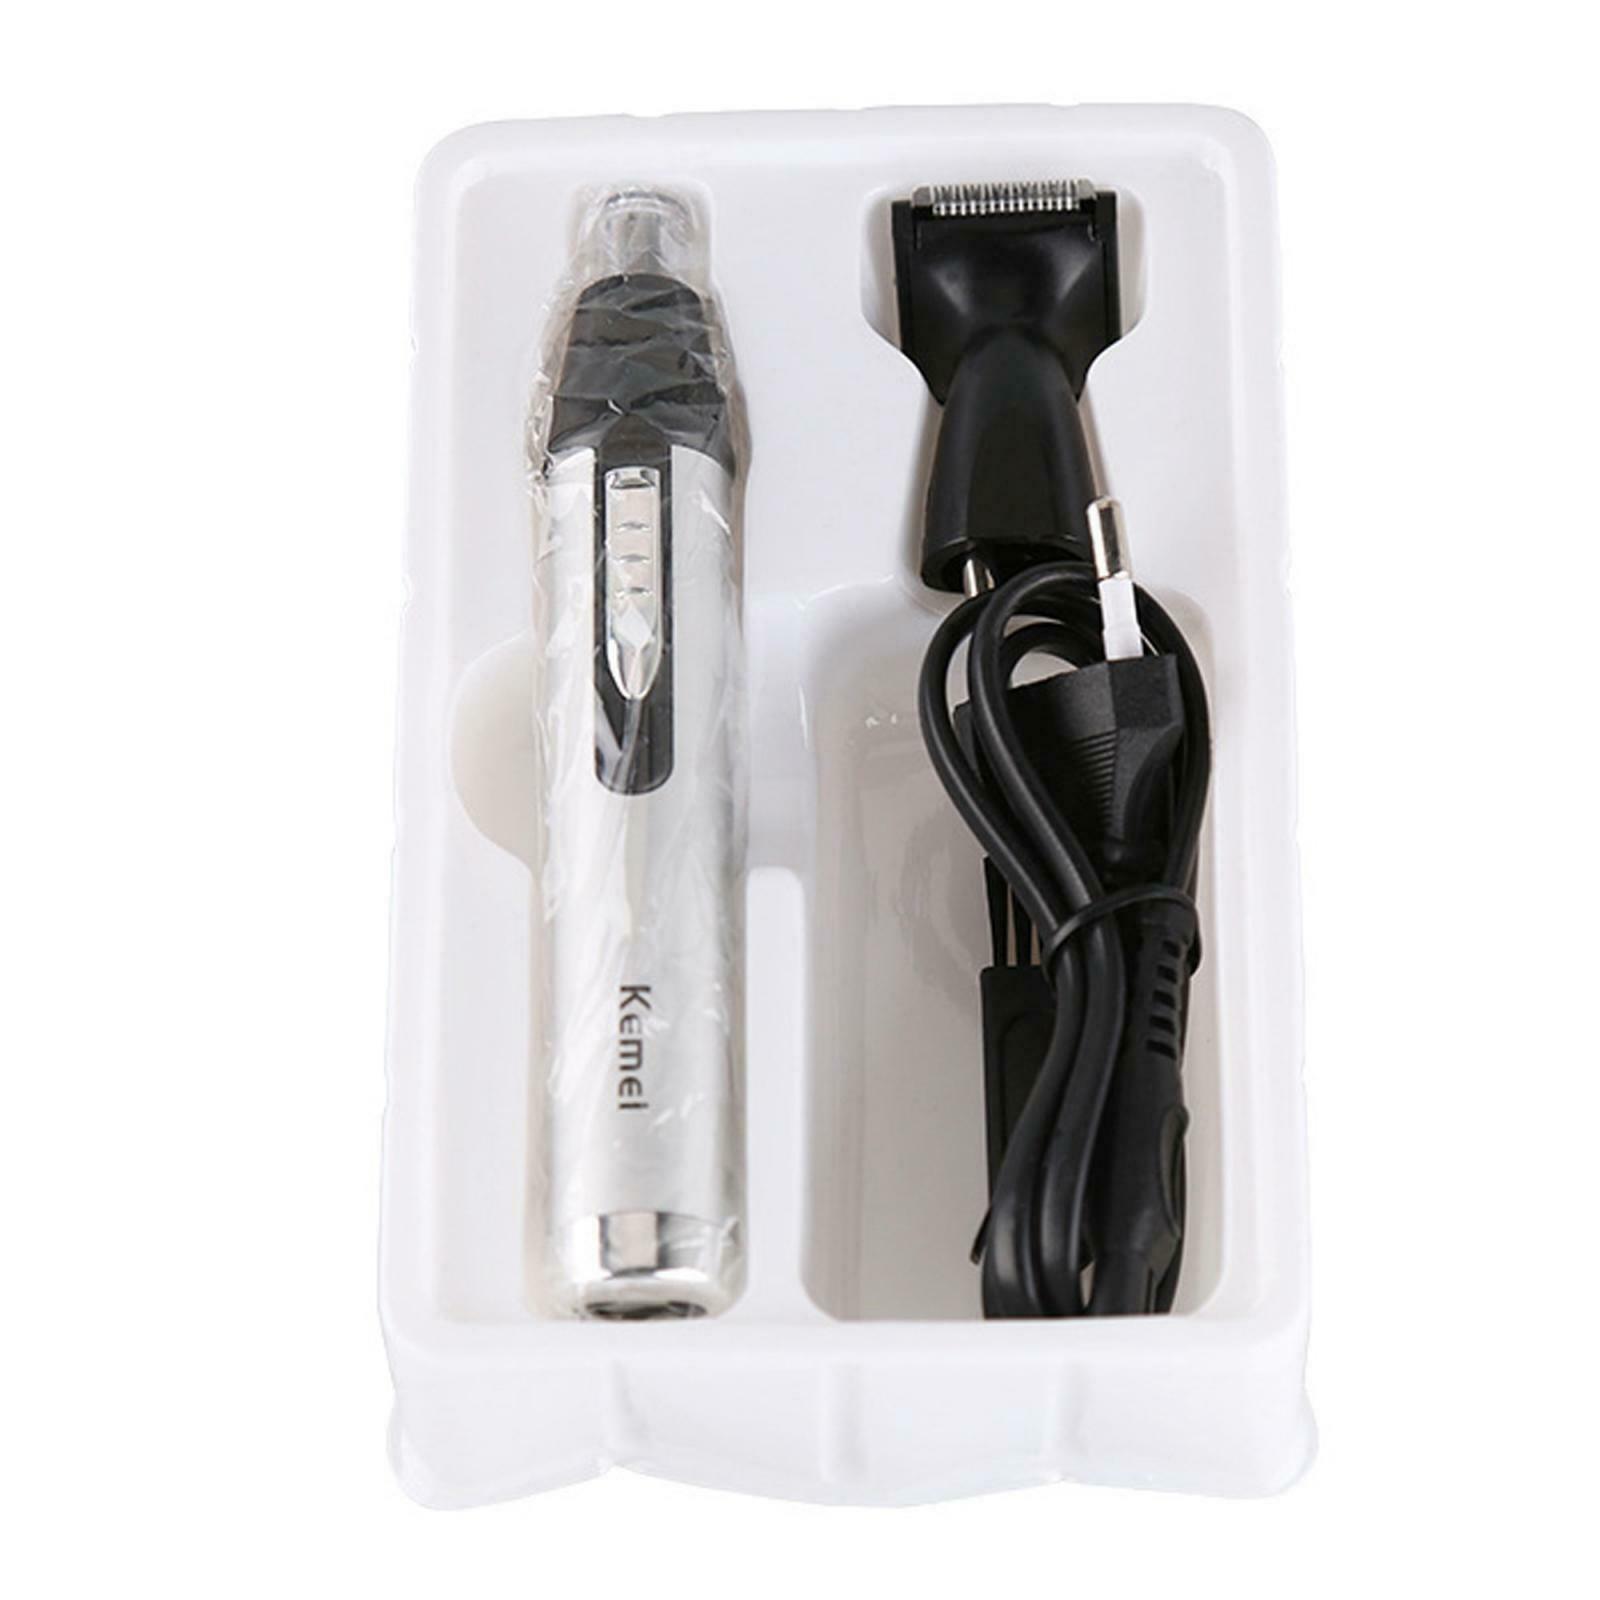 Professional Electric Ear and Nose Hair Trimmer Dual Edge Blades for Men